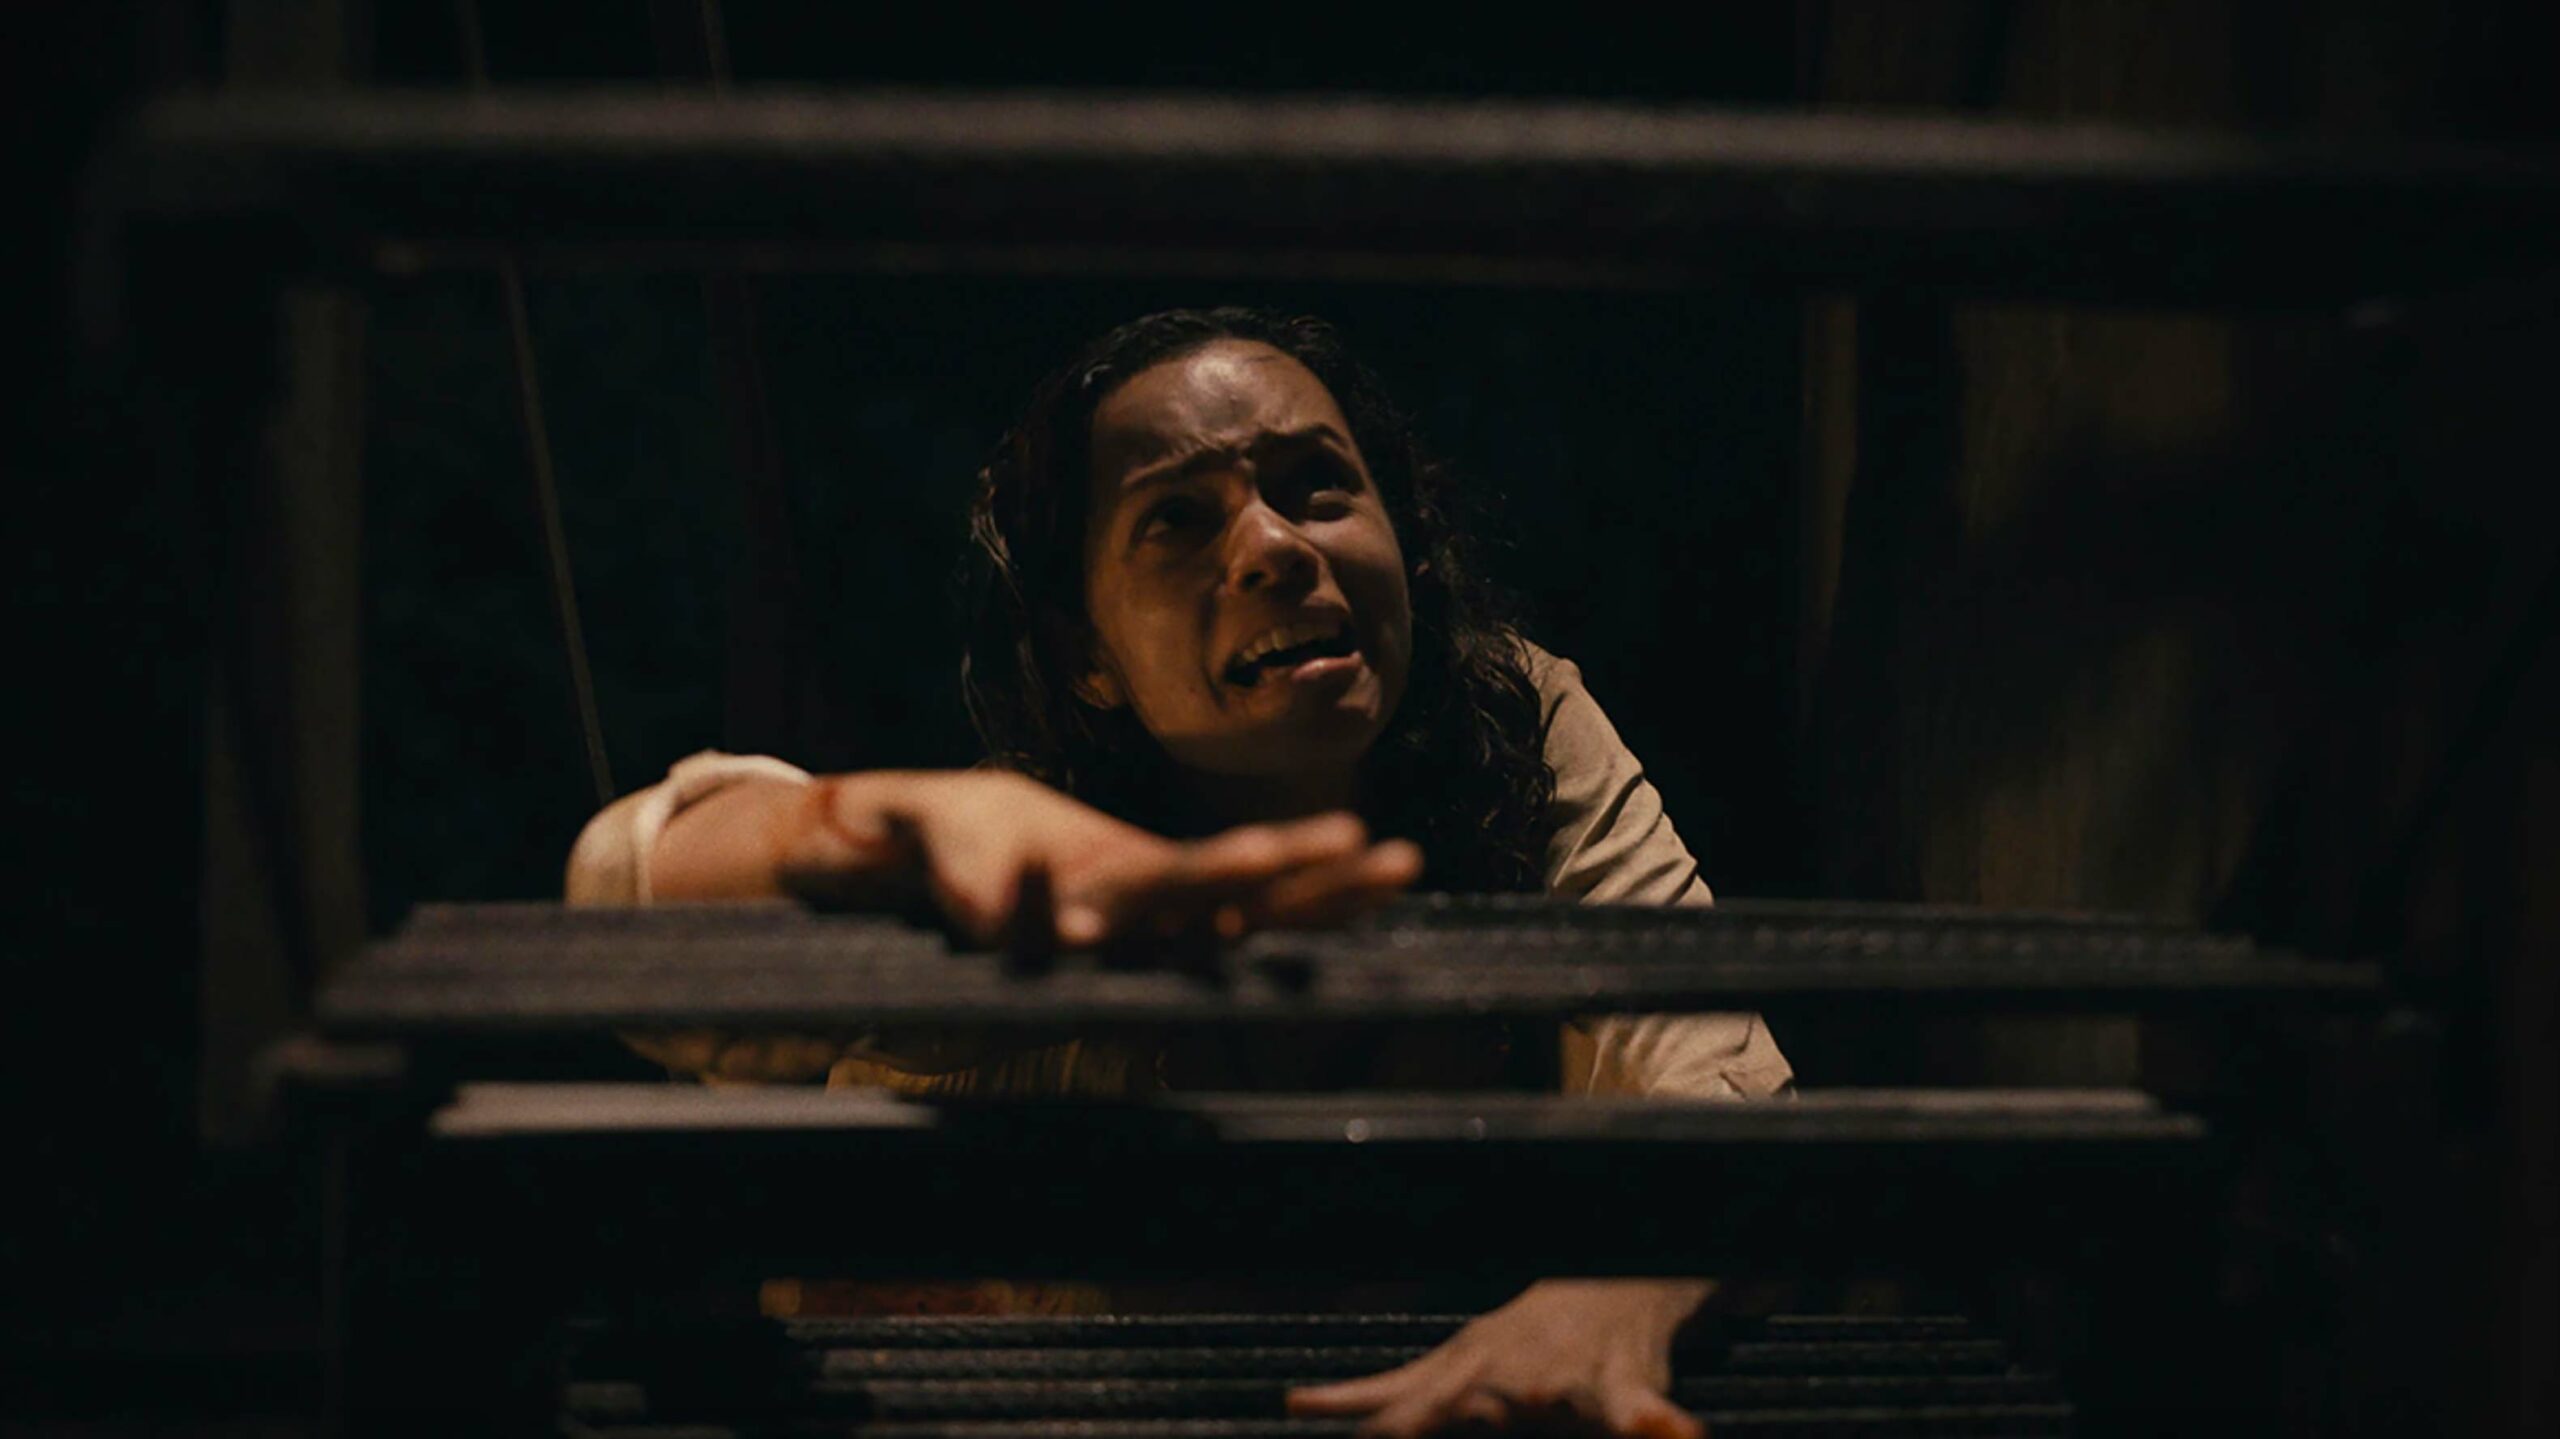 Tess, a young Black woman played by Georgina Campbell, in the 2022 horror movie Barbarian. She is crawling up stairs while crying.